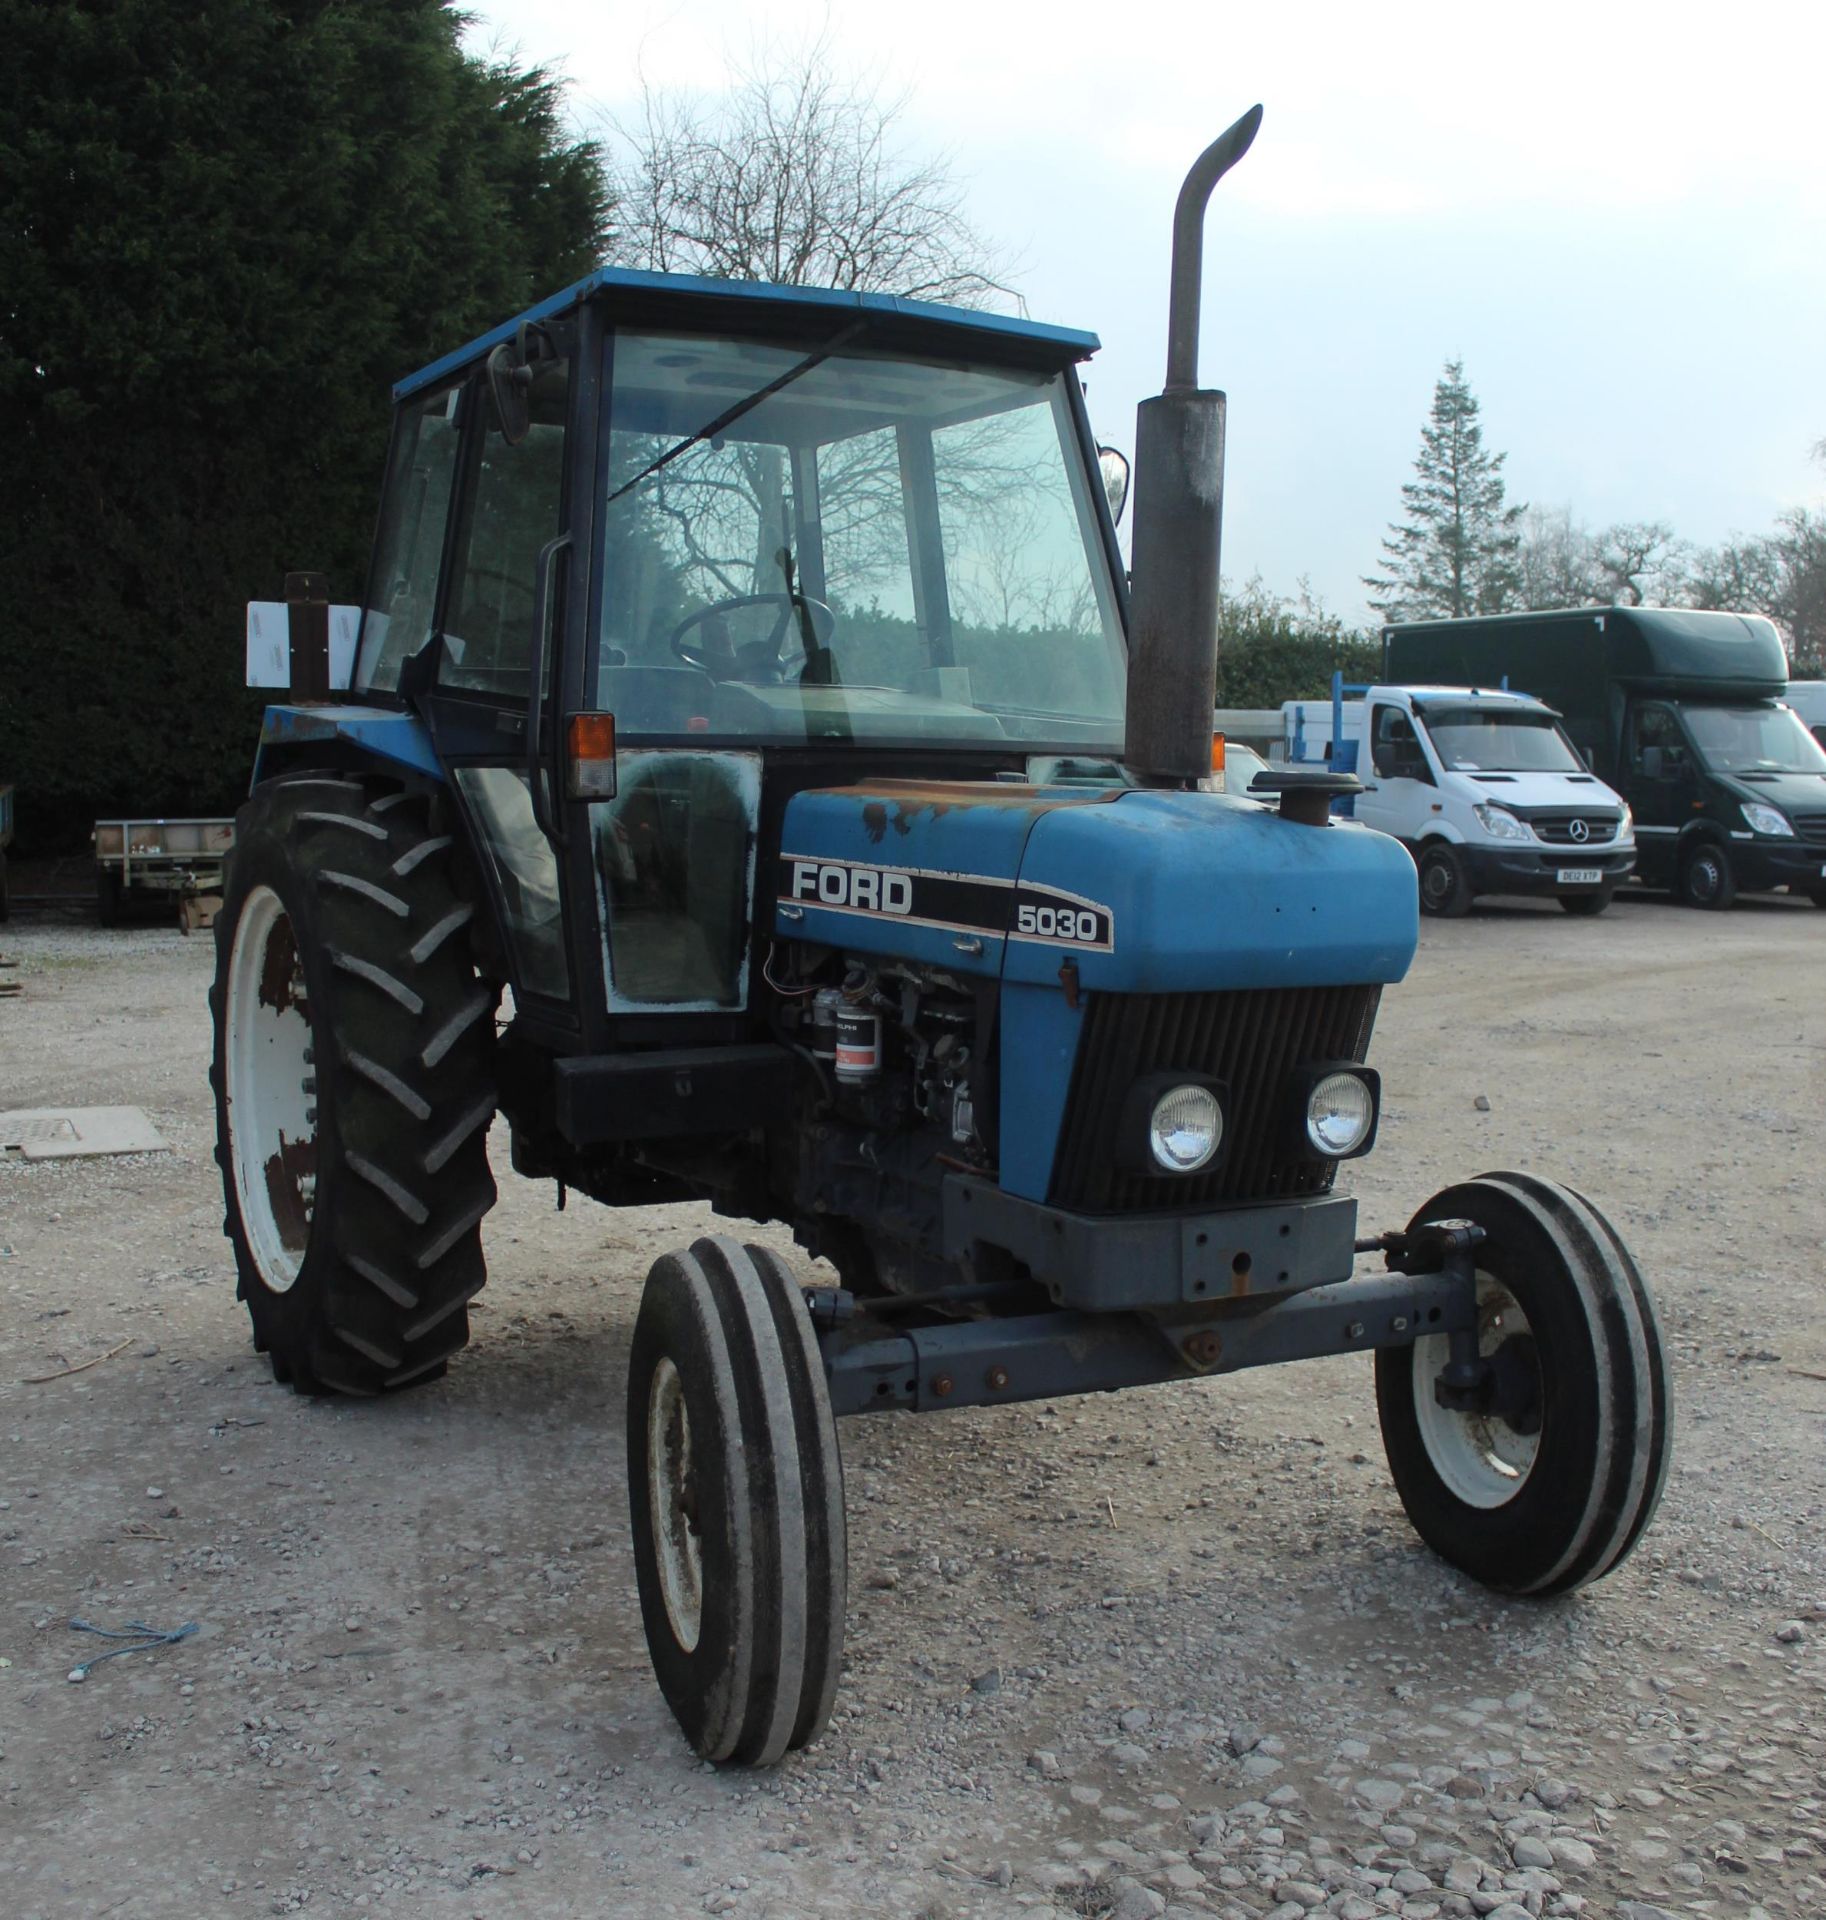 FORD 5030 2 WHEEL DRIVE TRACTOR 9014 HOURS ONE OWNER FROM NEW REG.NO. M85 TRC FIRST REG 01/06/95 - Image 4 of 13